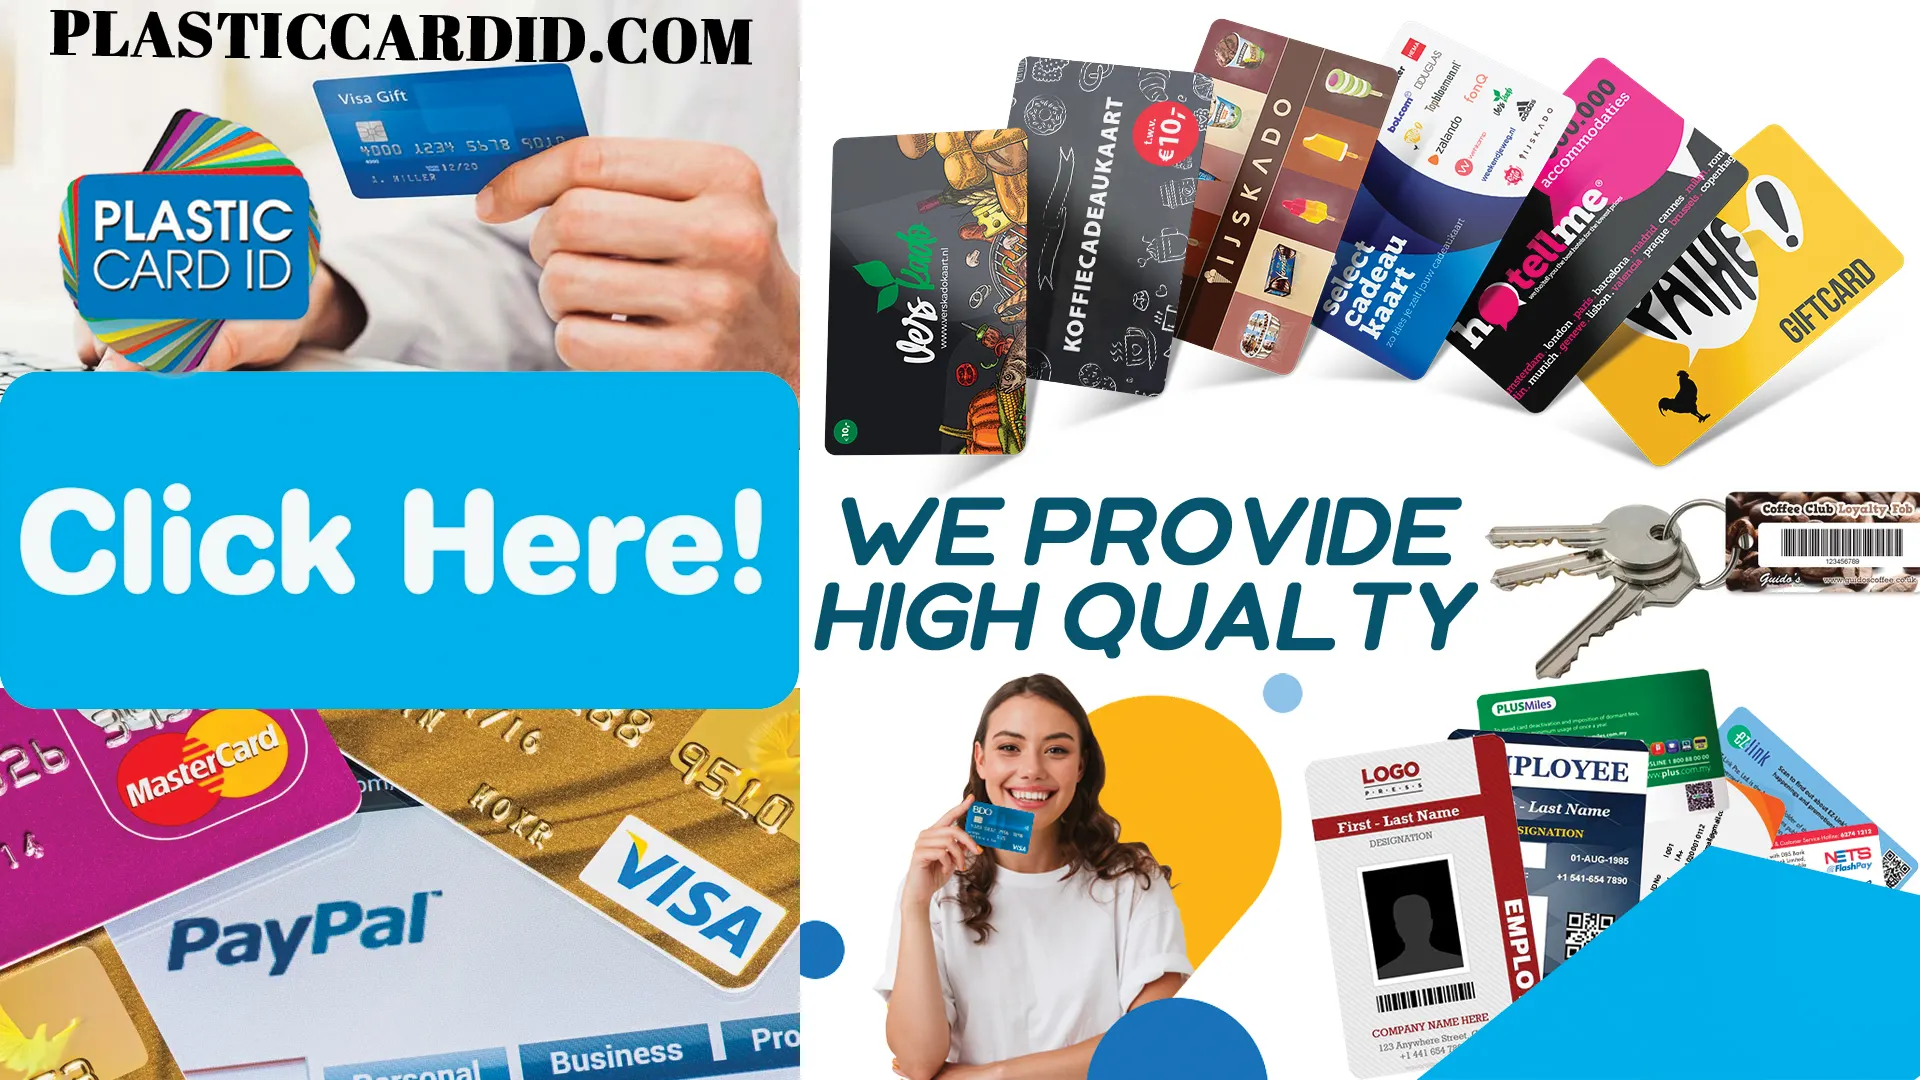 Quality Cards: A Visual Statement of Your Brand